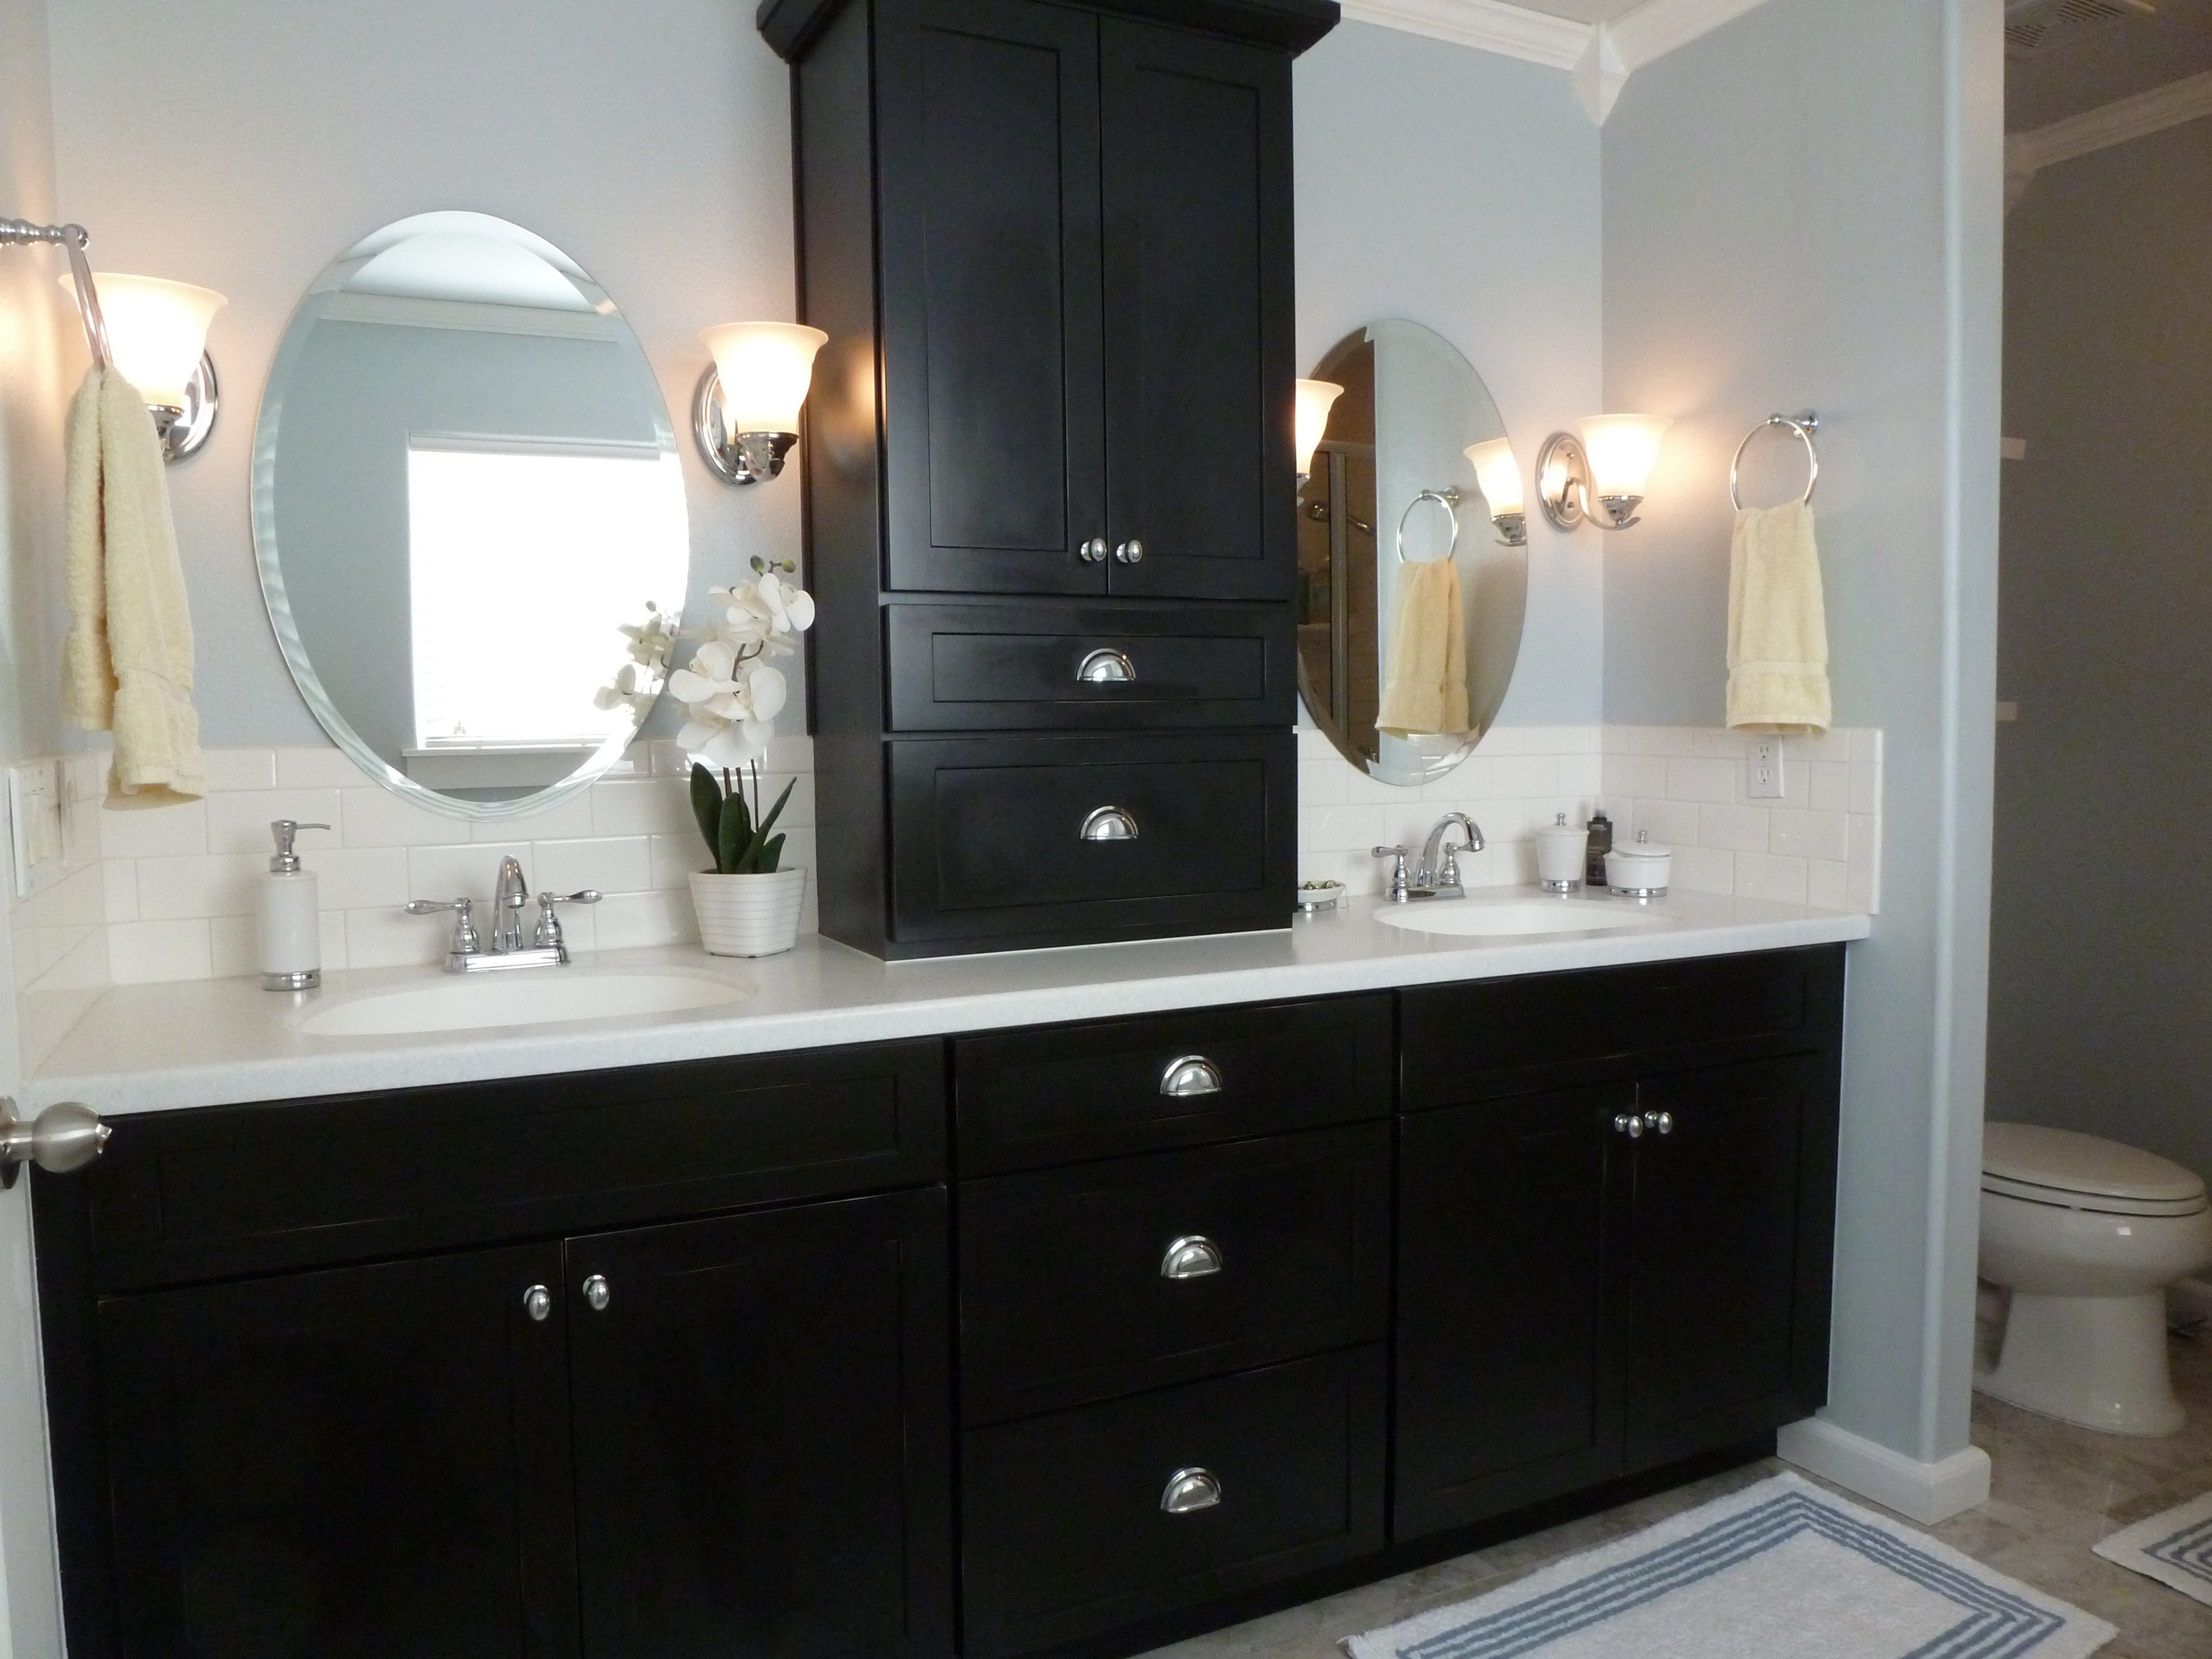 HOW TO DESIGN A LUXURY BATHROOM WITH BLACK CABINETS (5)